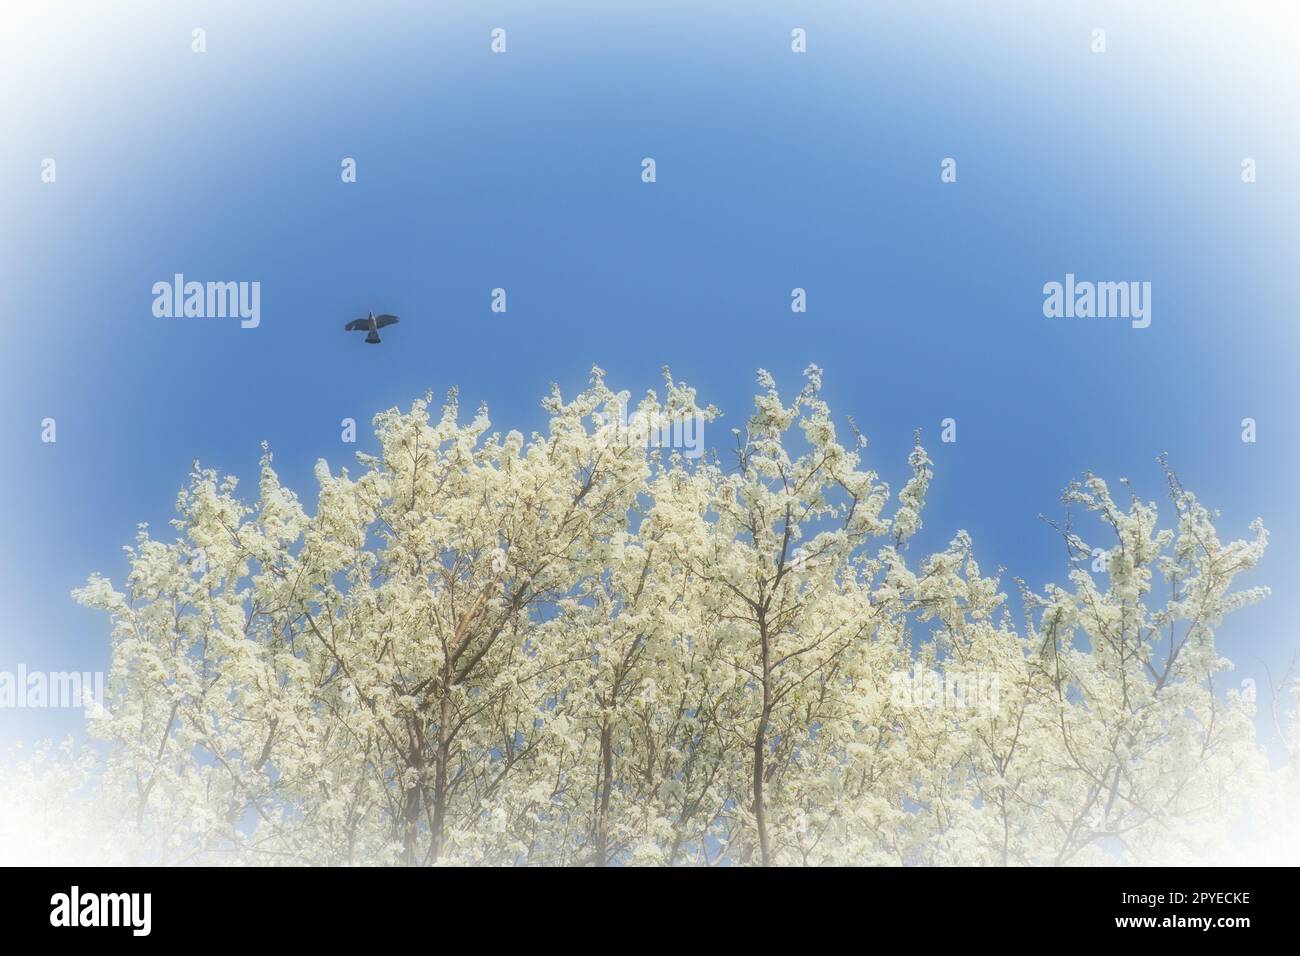 Blossoming of cherries, sweet cherries and bird cherry. A black bird flies across the blue sky above numerous beautiful fragrant white flowers. Migratory birds. Blurred foggy focus. White vignette. Stock Photo